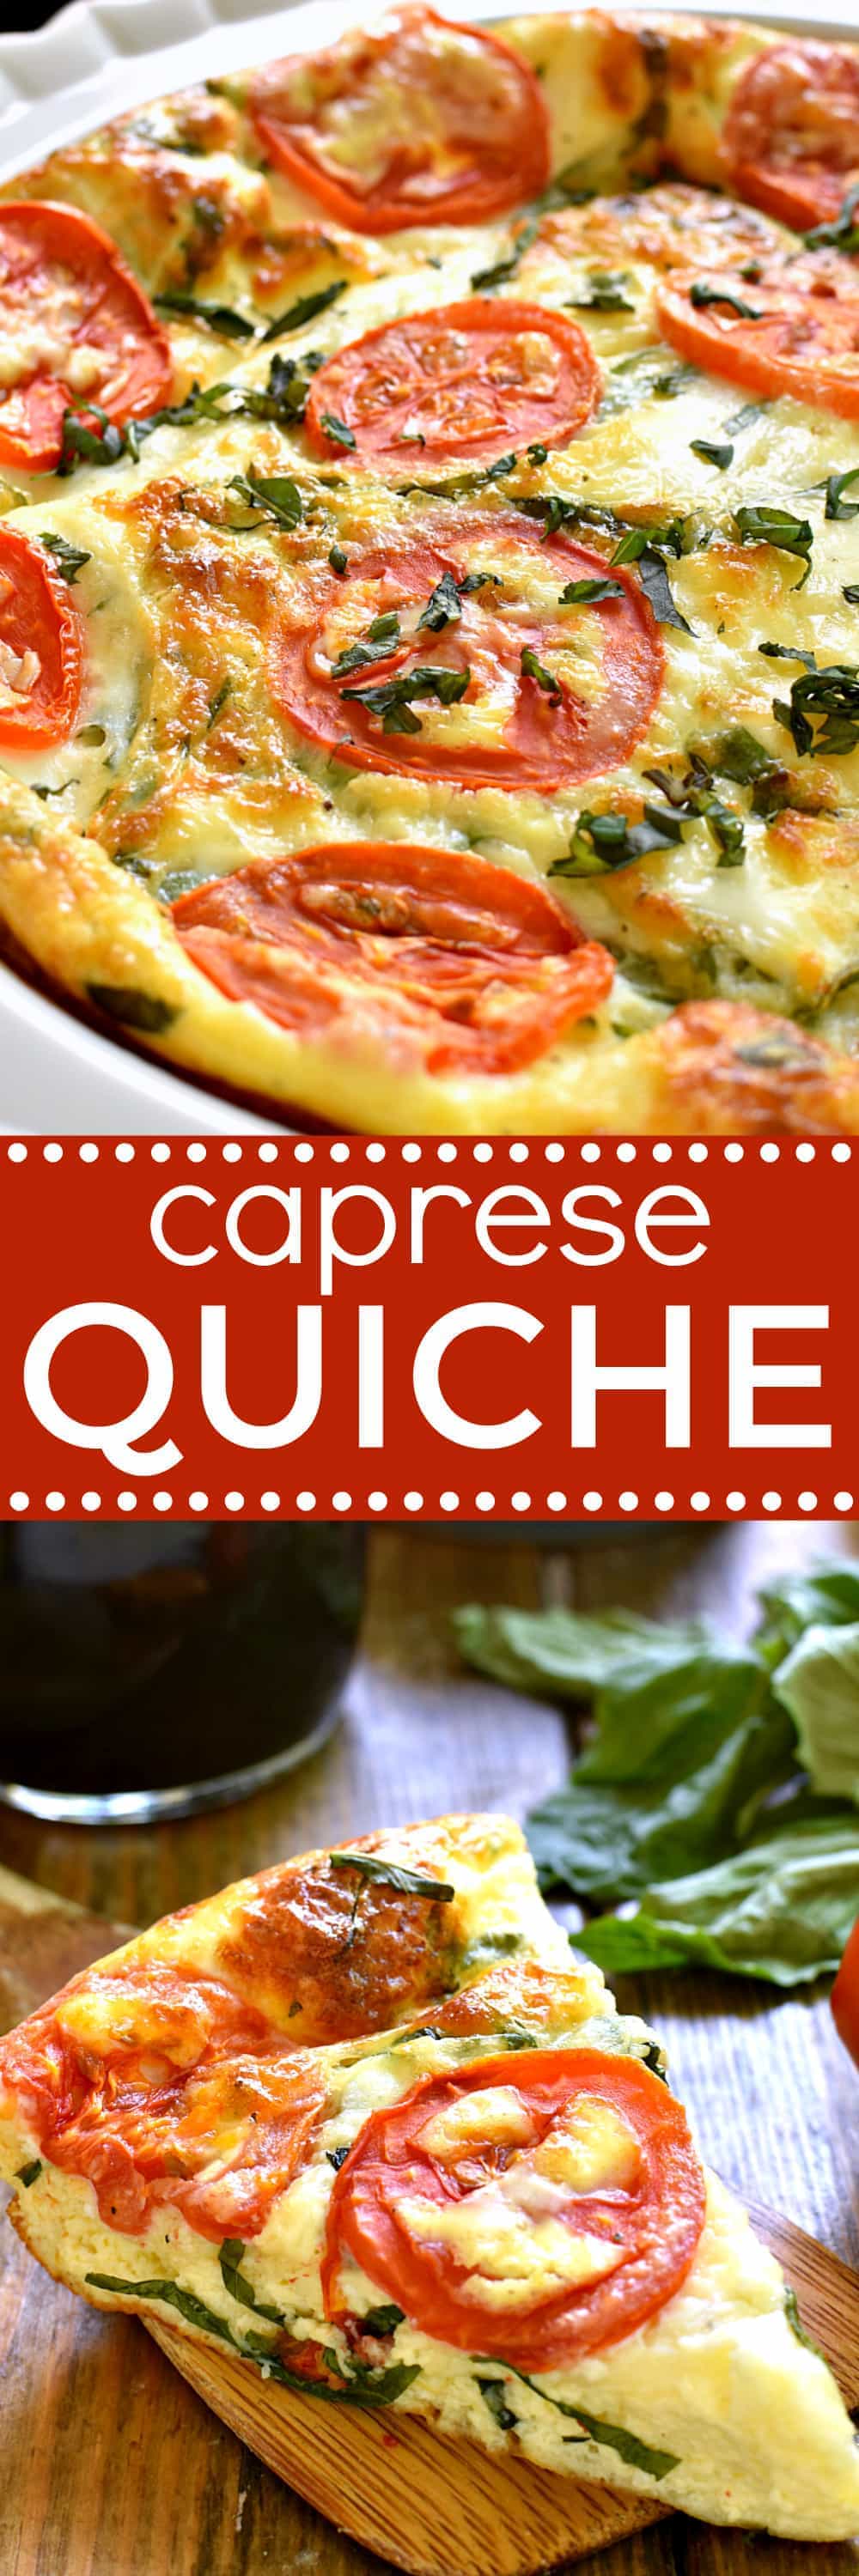 This Caprese Quiche is the ultimate summer breakfast! Loaded with fresh tomatoes, basil, and mozzarella cheese, it comes together quickly and has all the best flavors of summer! And...it's not just for breakfast. This Caprese Quiche makes a great lunch or dinner, too!